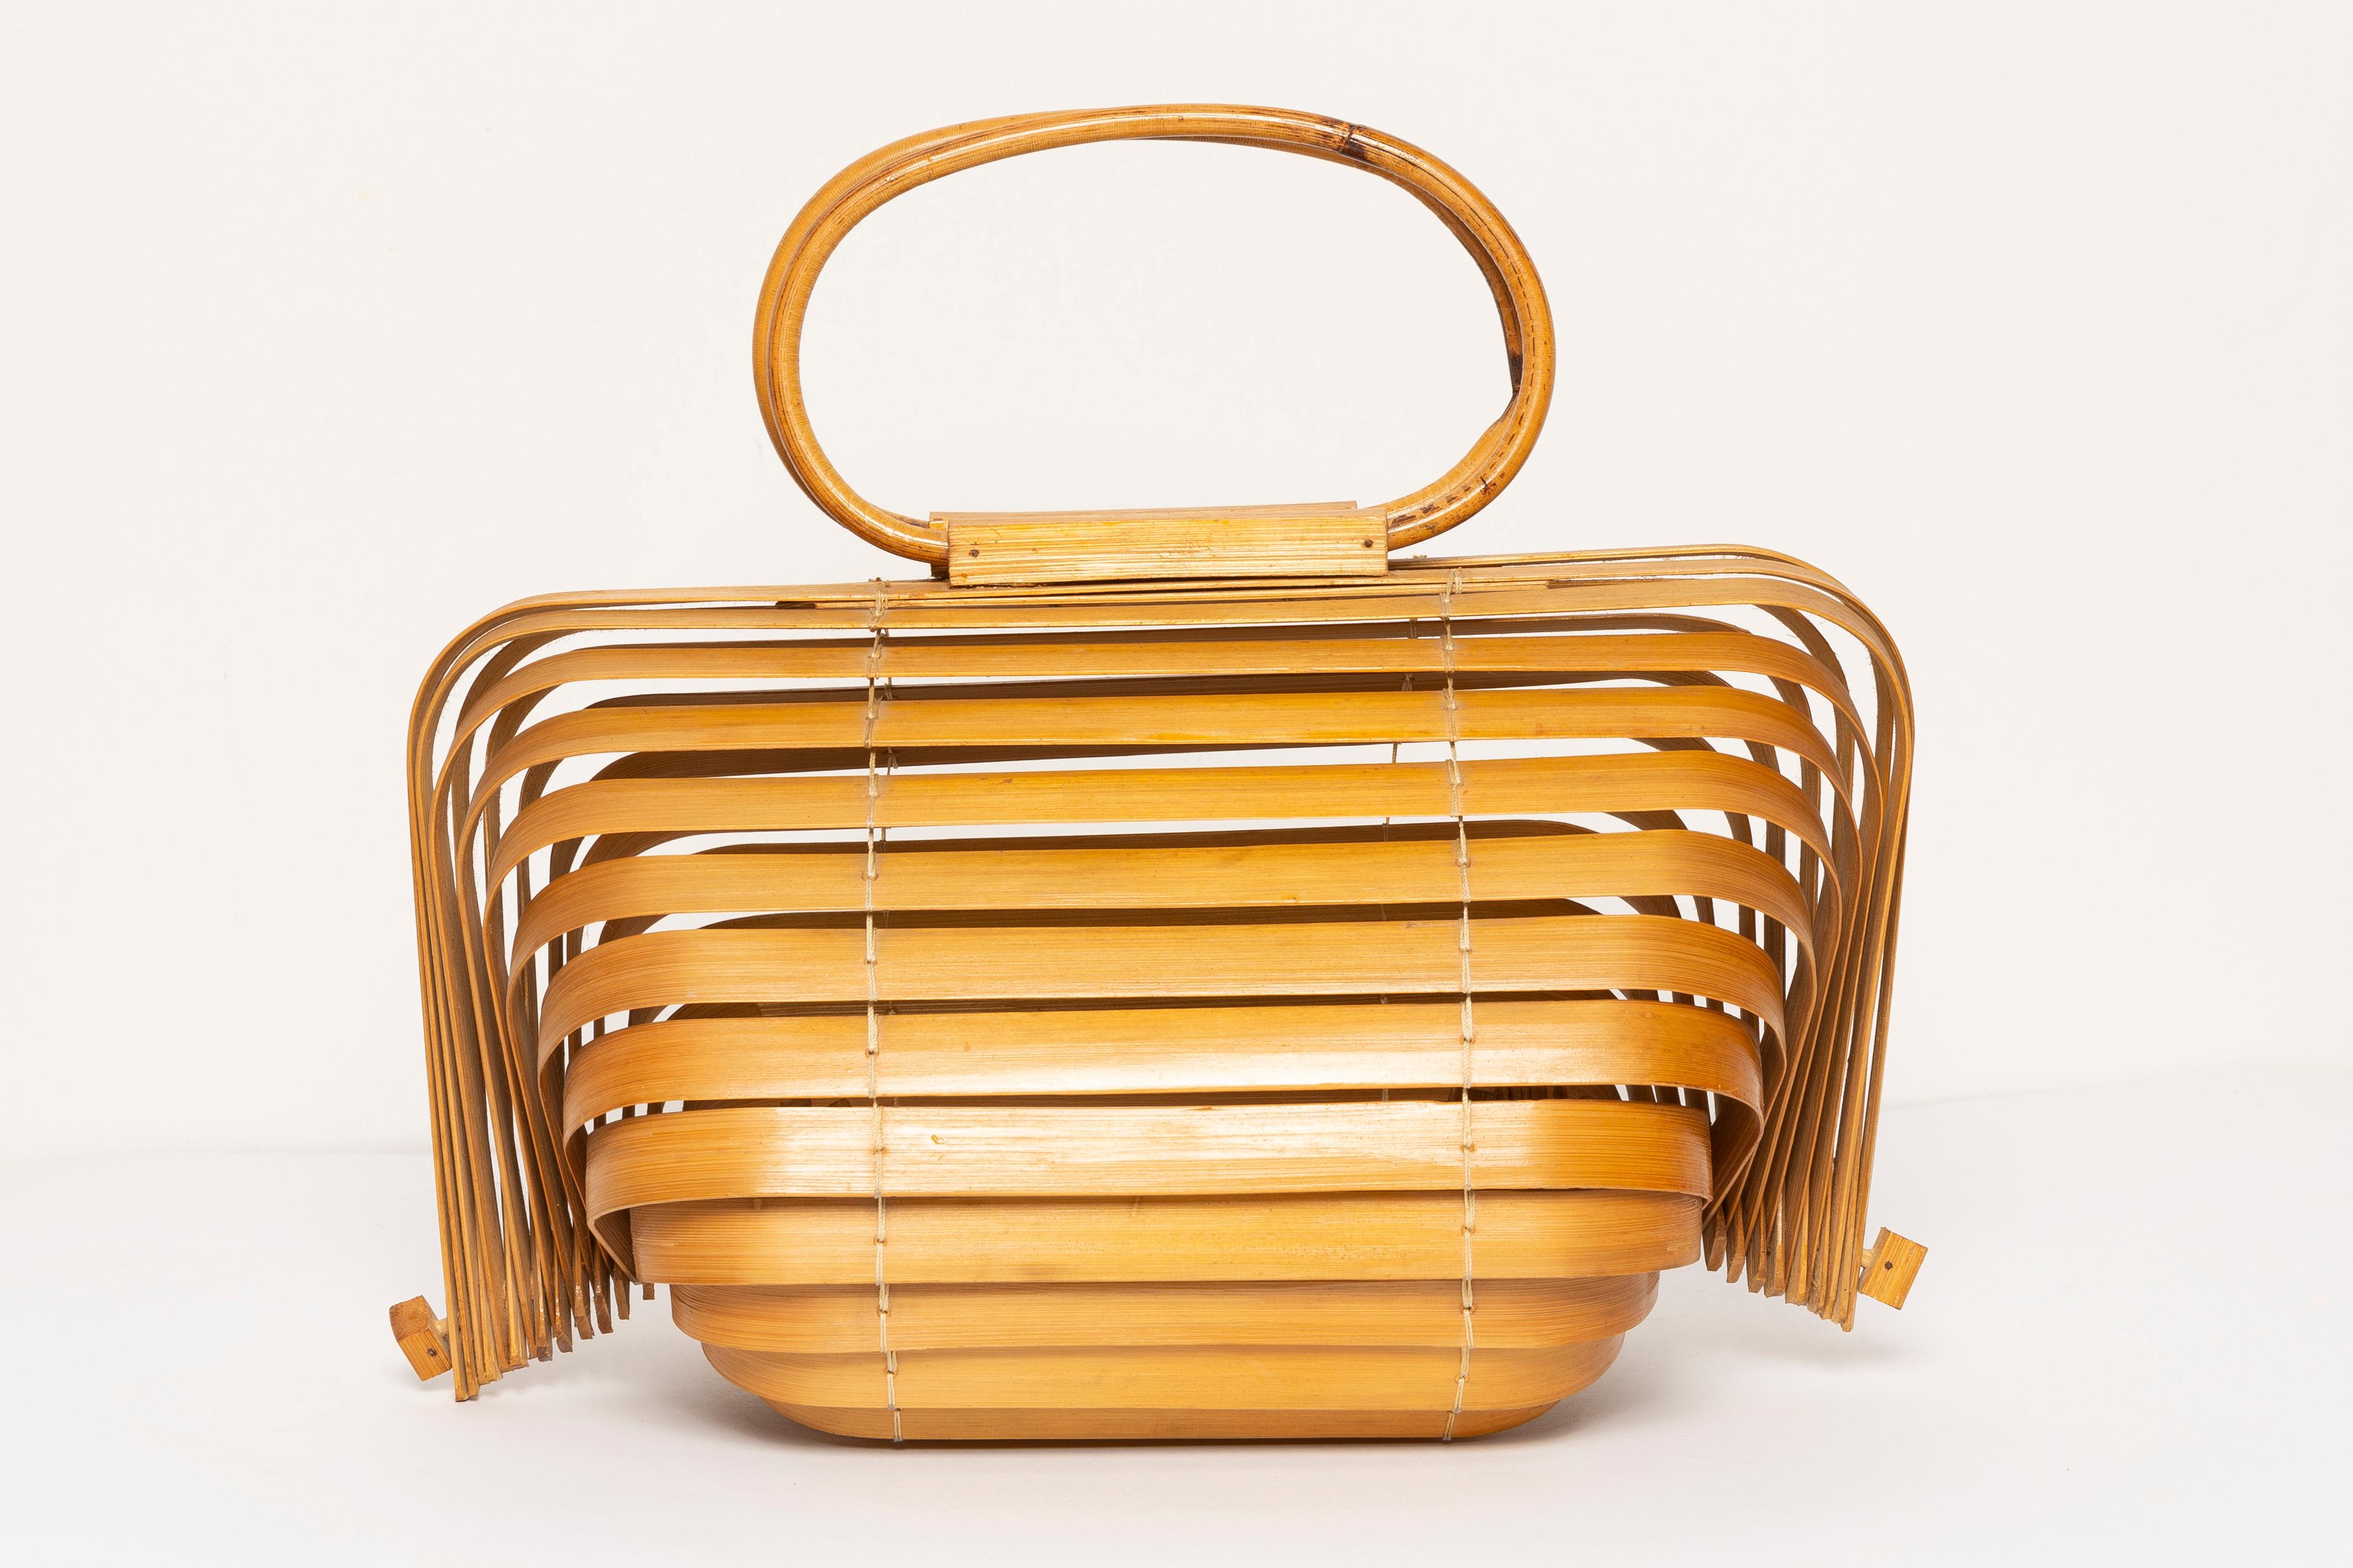 A Japanese-inspired slatted bag. It in very good condition, the wood is complete, without any breaks or losses. Absolutely amazing only one unique piece. Produced in 1960s in Poland, Europe. 



